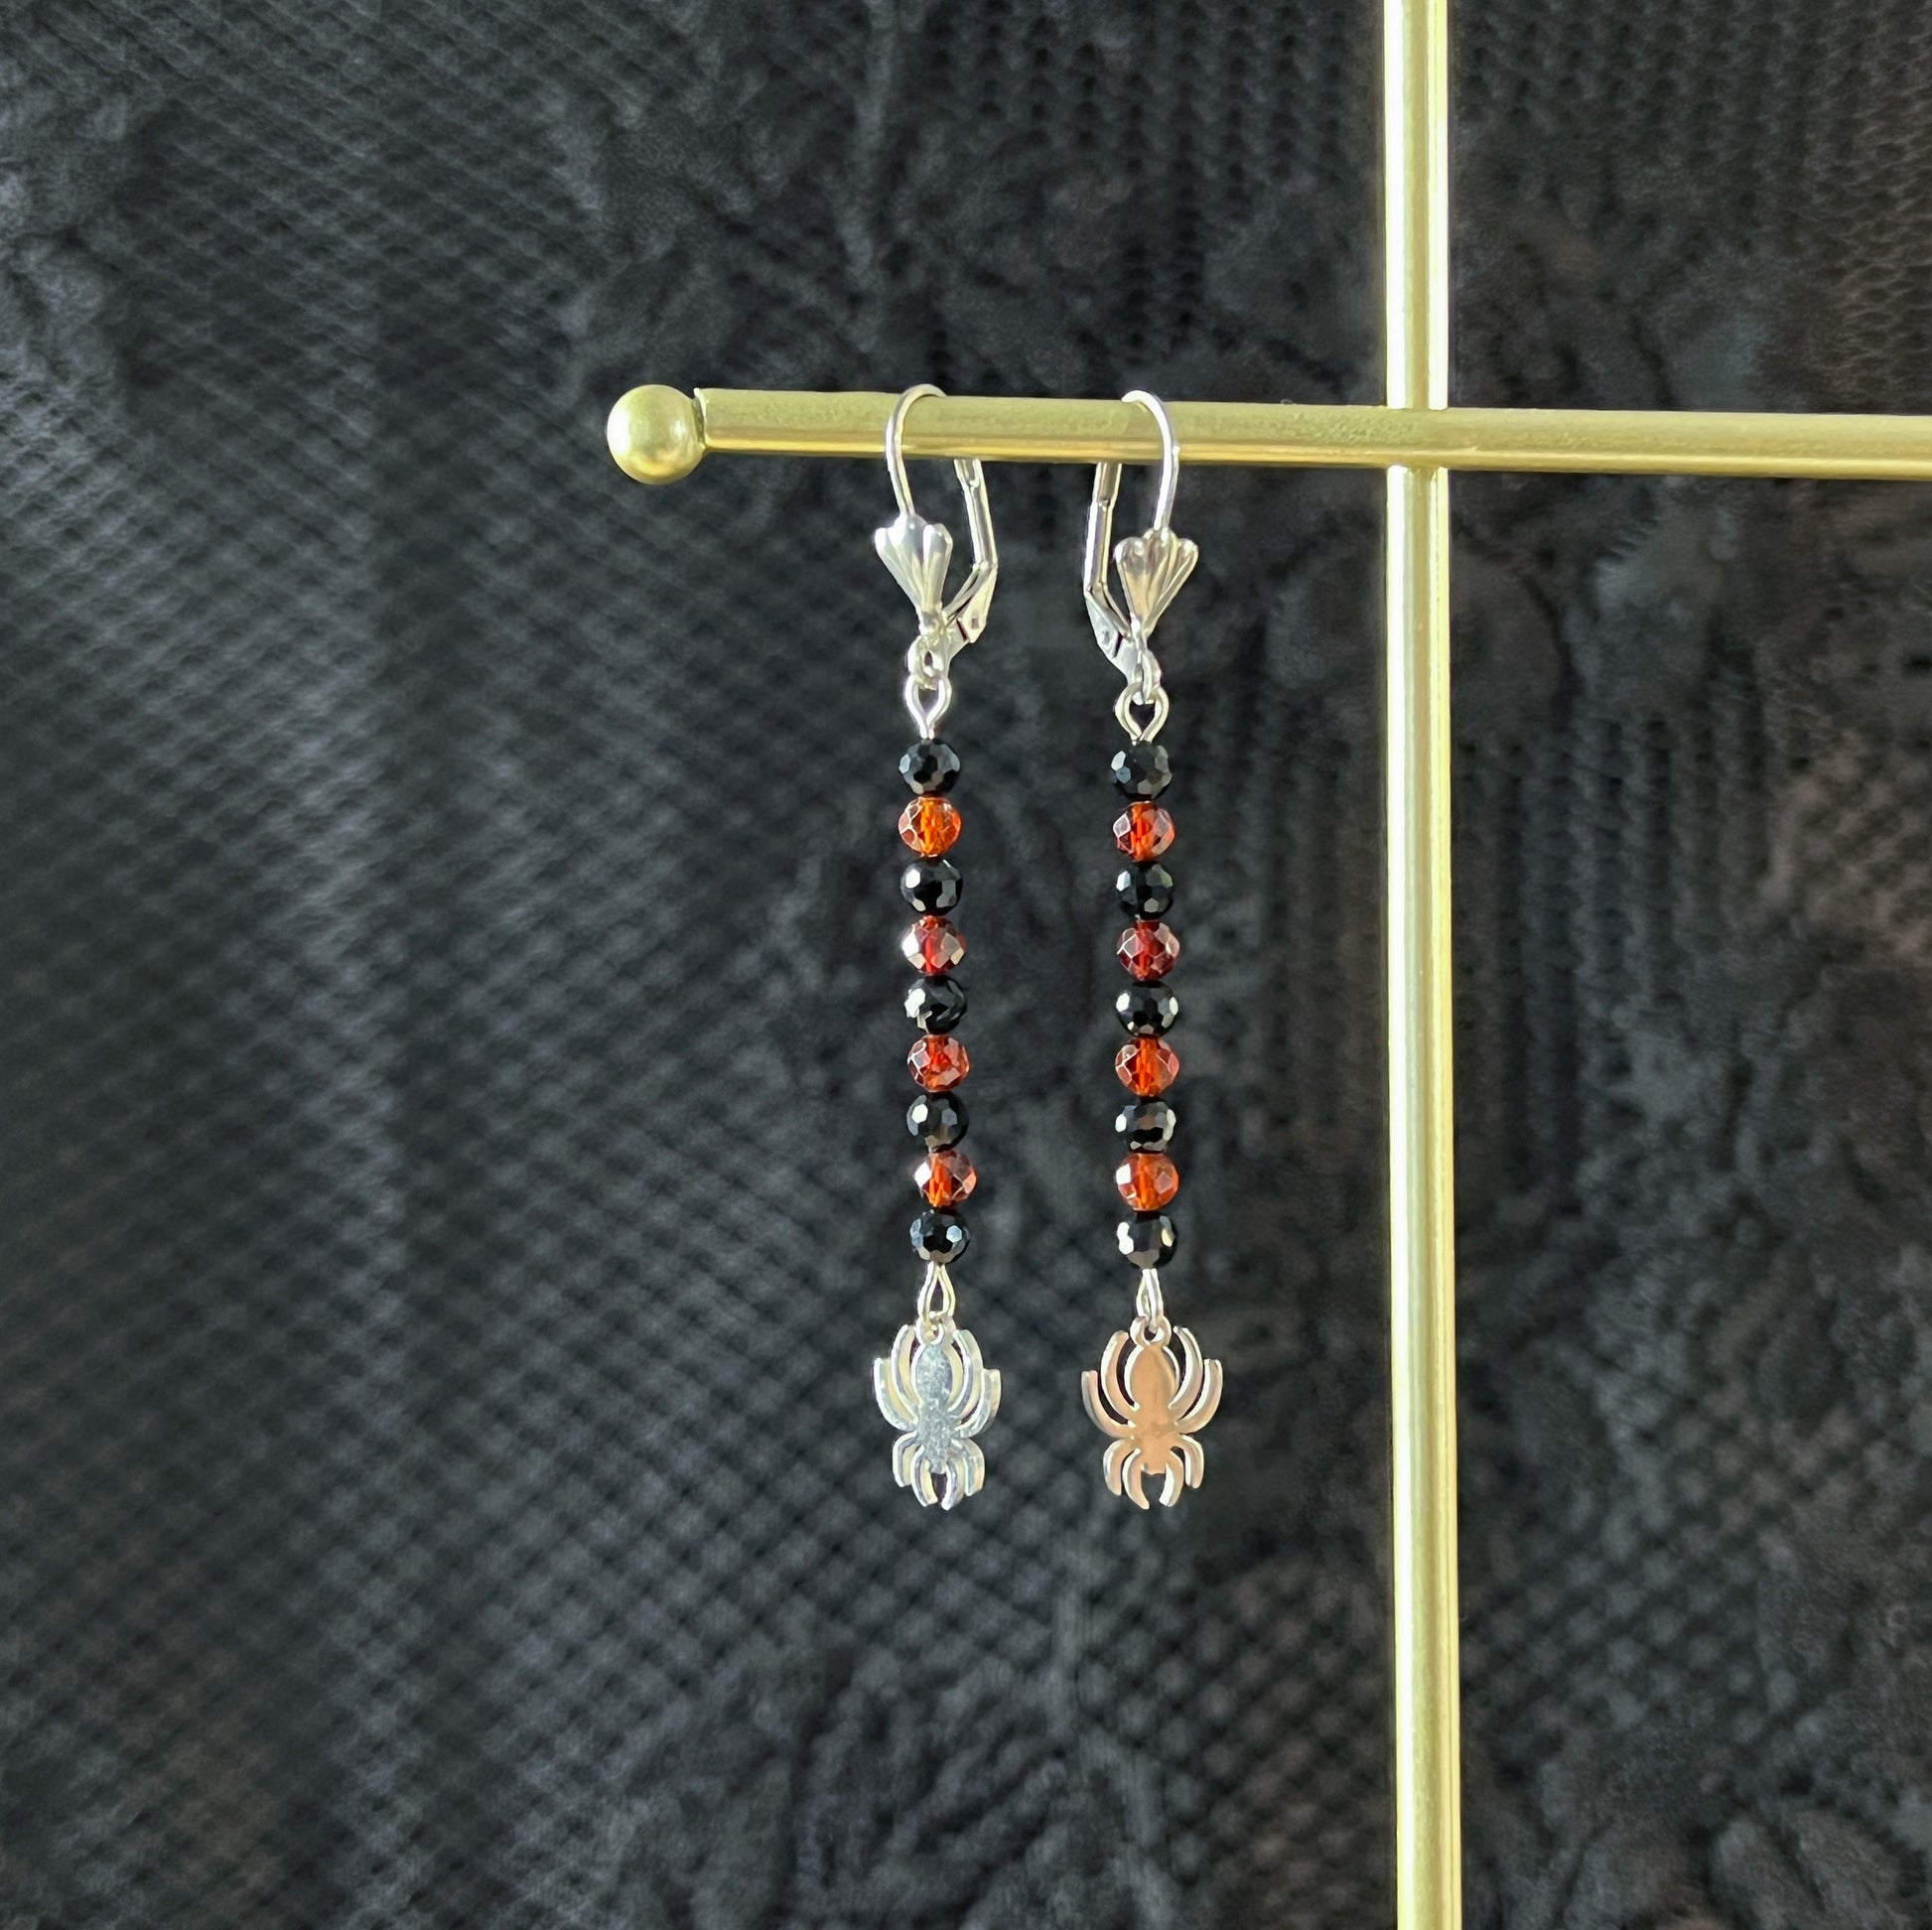 Gothic spider earrings made of garnet, onyx and stainless steel Baguette Magick